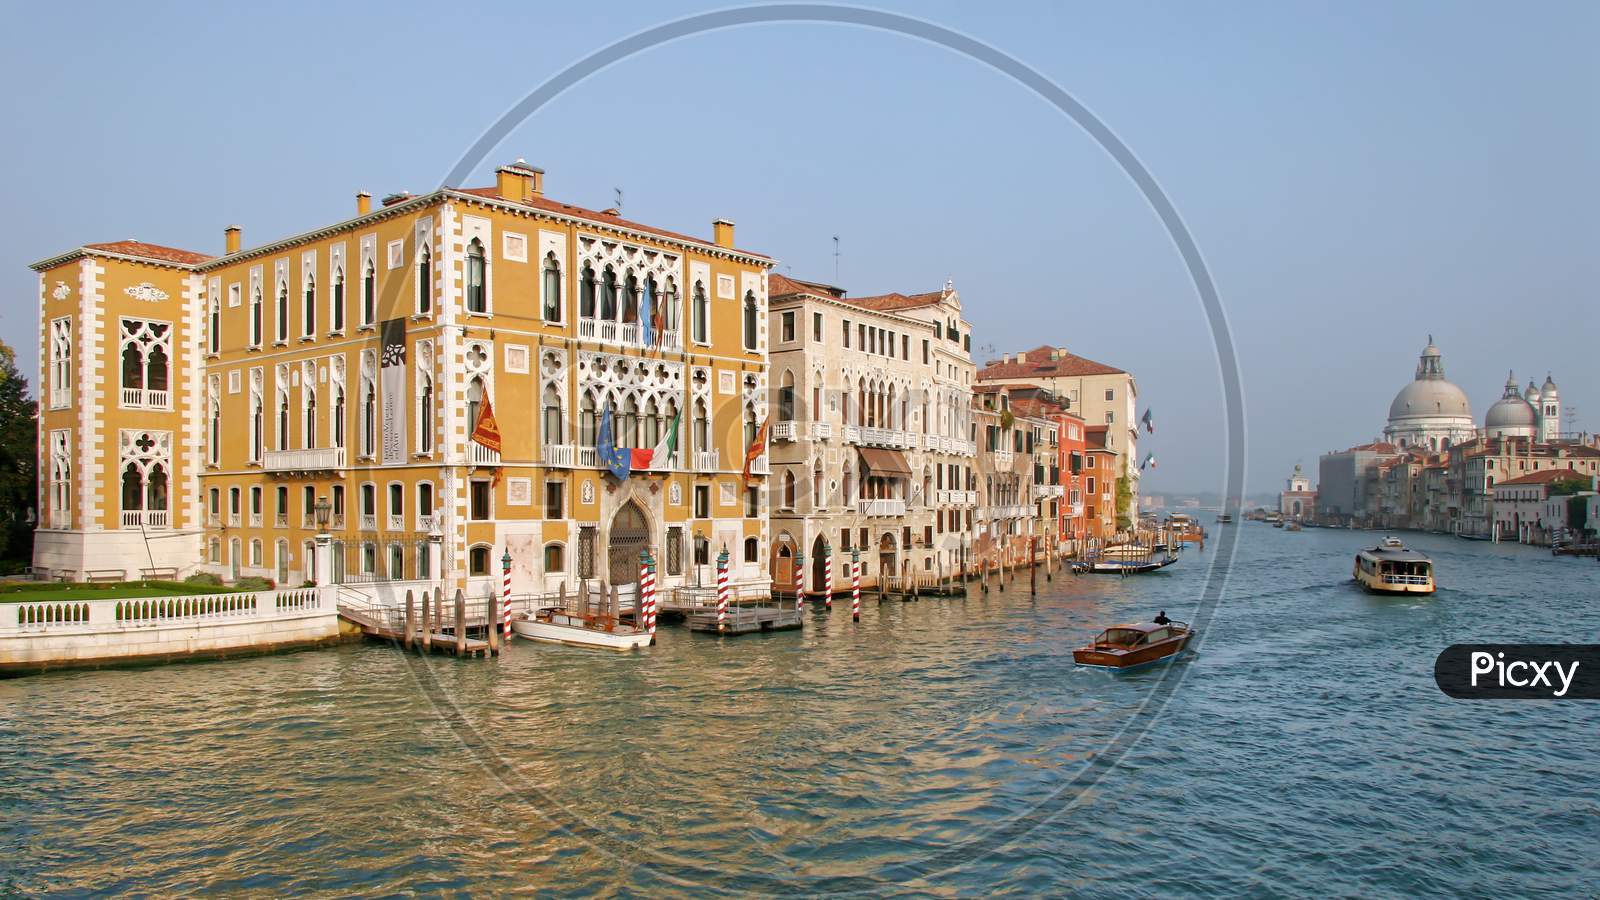 Venice, Italy/Europe - October 26 : View Down The Grand Canal In Venice On October 26, 2006. One Unidentified Person